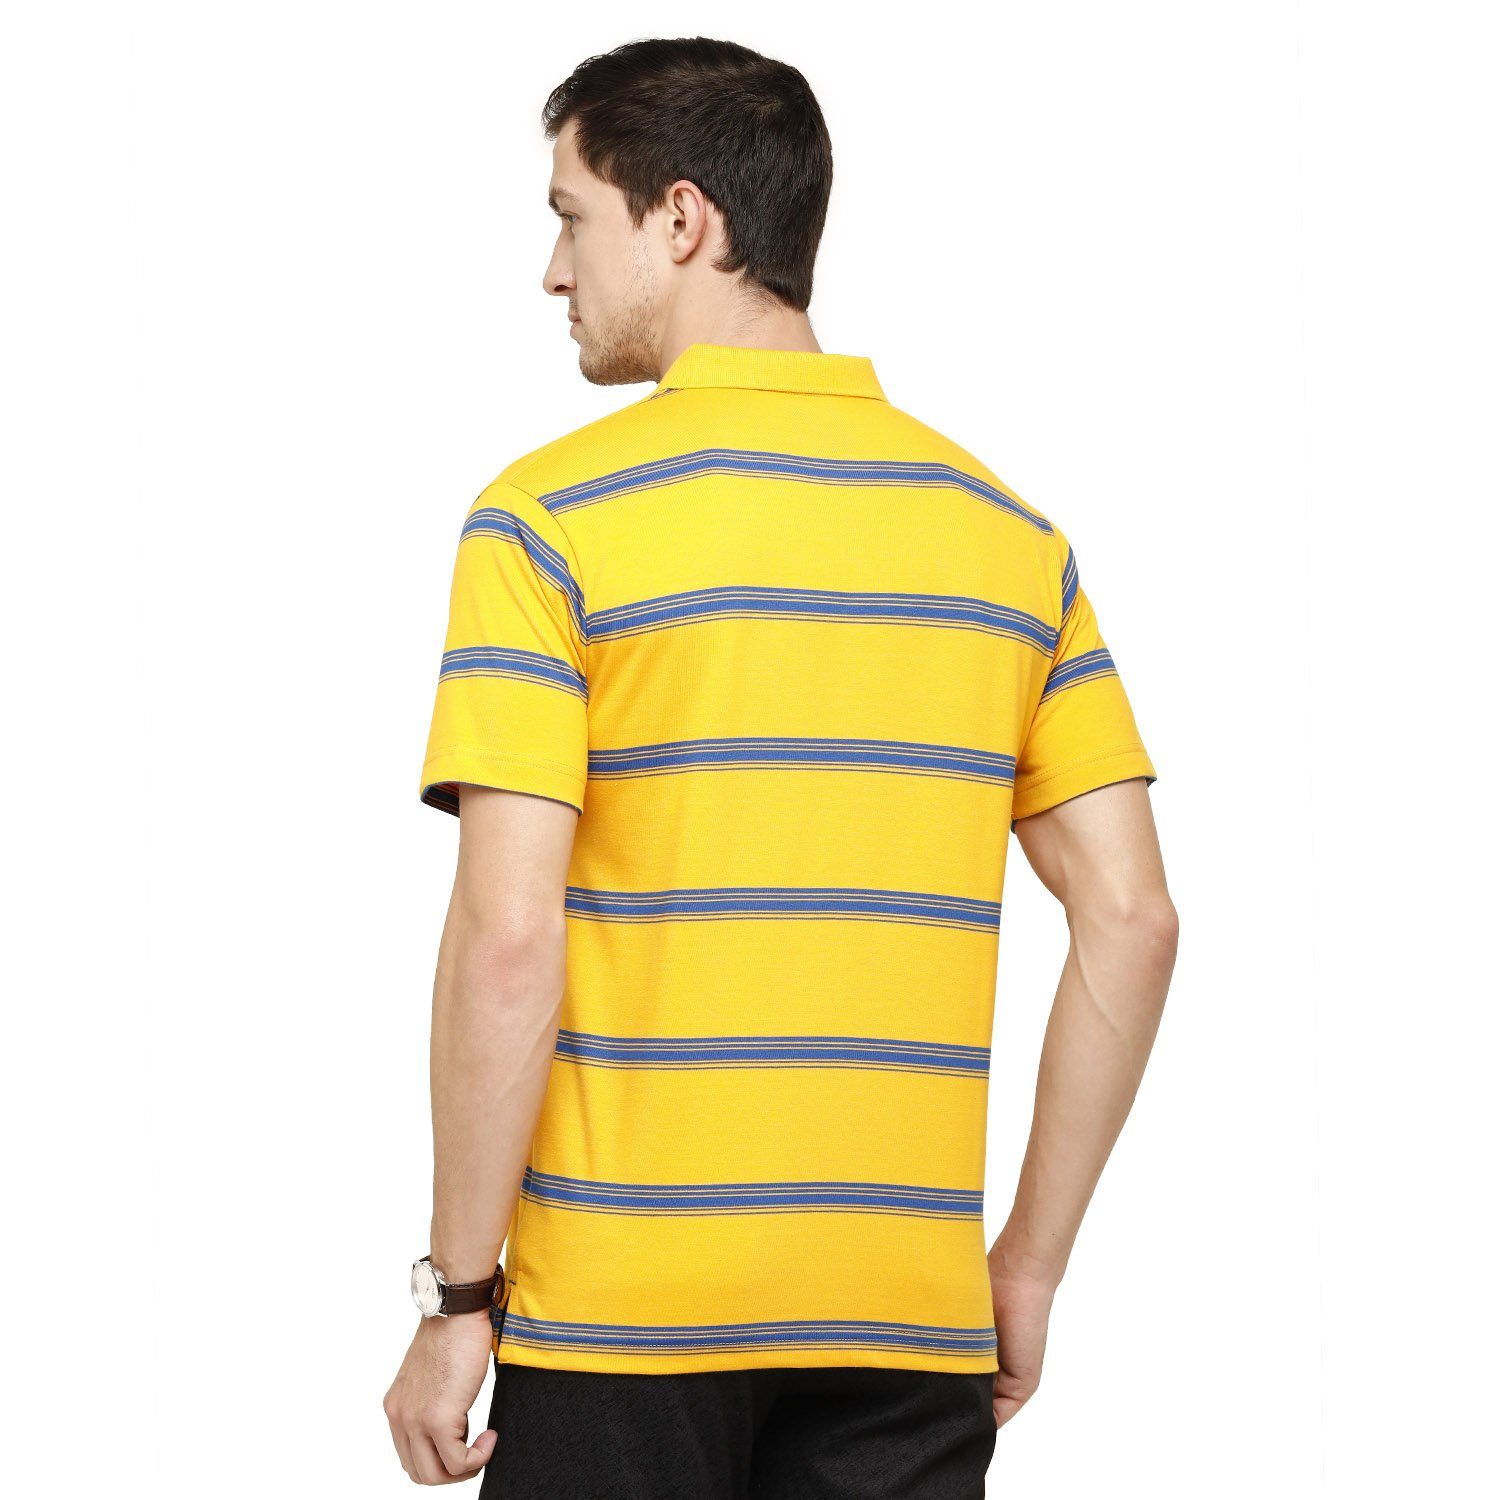 Classic Polo Mens Striped Polo Neck Half Sleeve Regular Fit Cotton Polyester Blend Yellow Fashion T-Shirt ( AVON - 460 A AF P ) T-shirt Classic Polo 